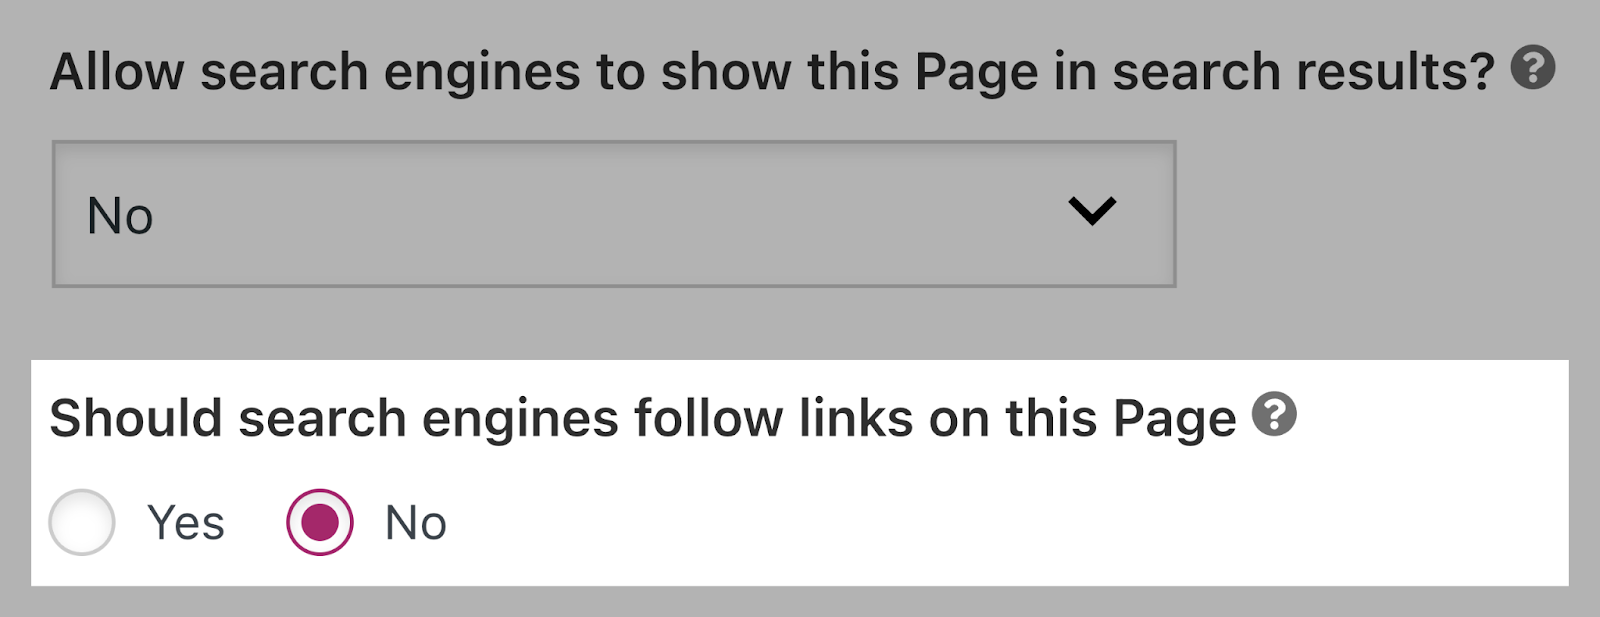 select "No" in "Should search engines follow links on this page?"